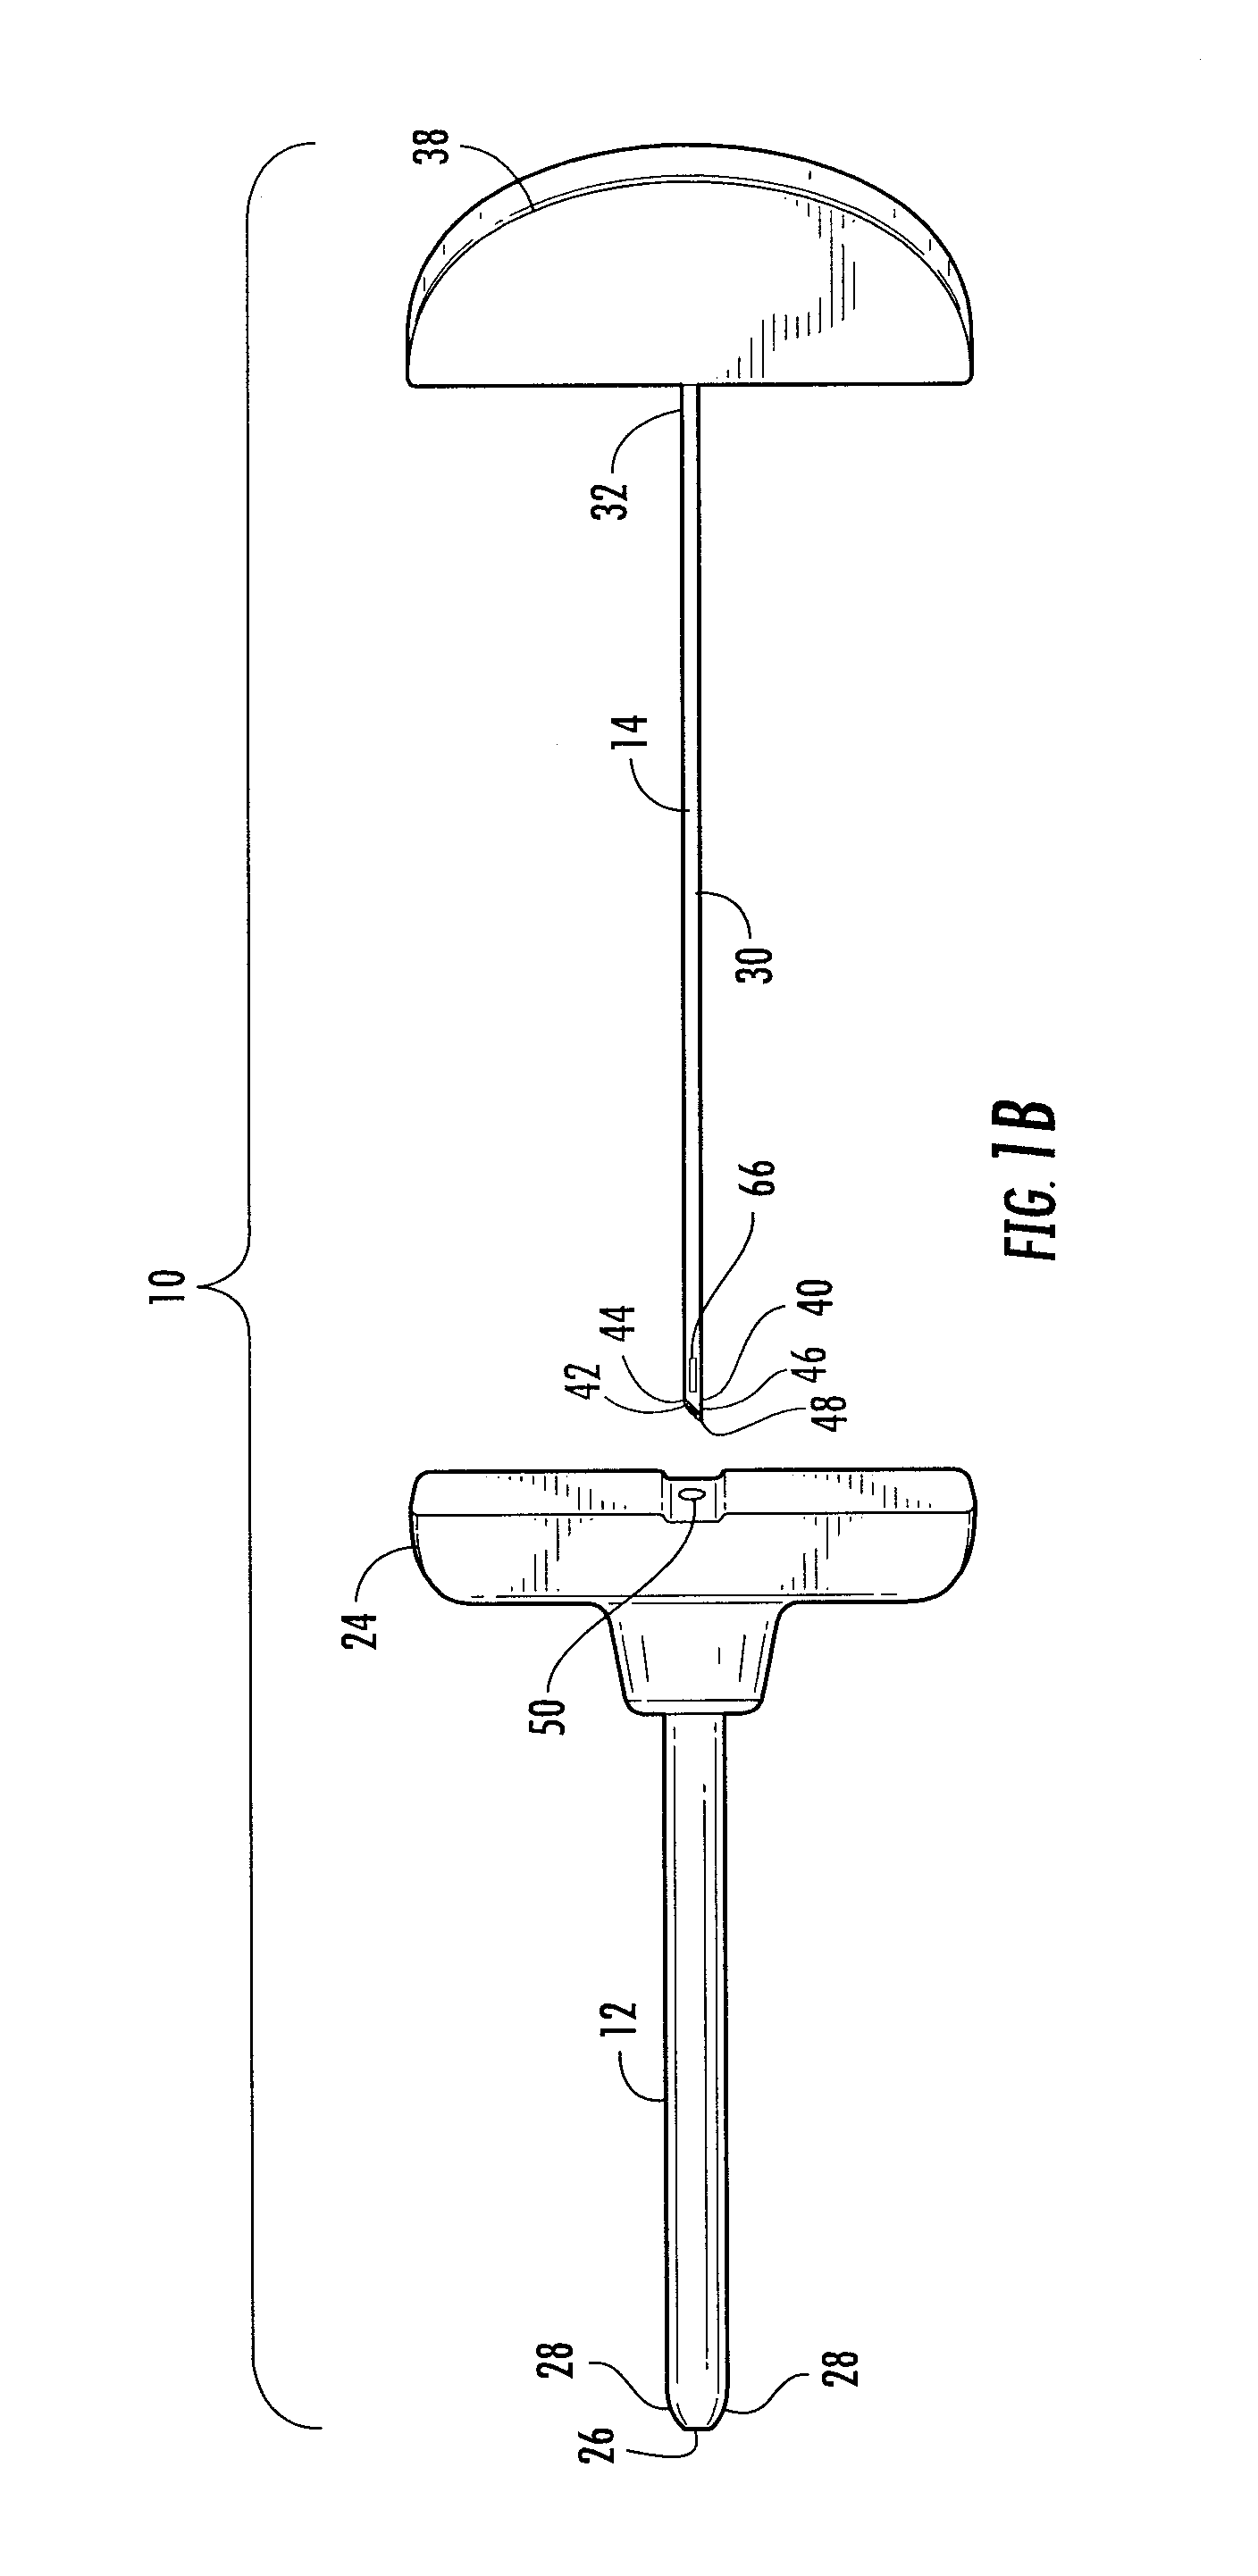 Instrument For Concurrent Injection Of Anesthesia And Removal Of Specimens From A Body